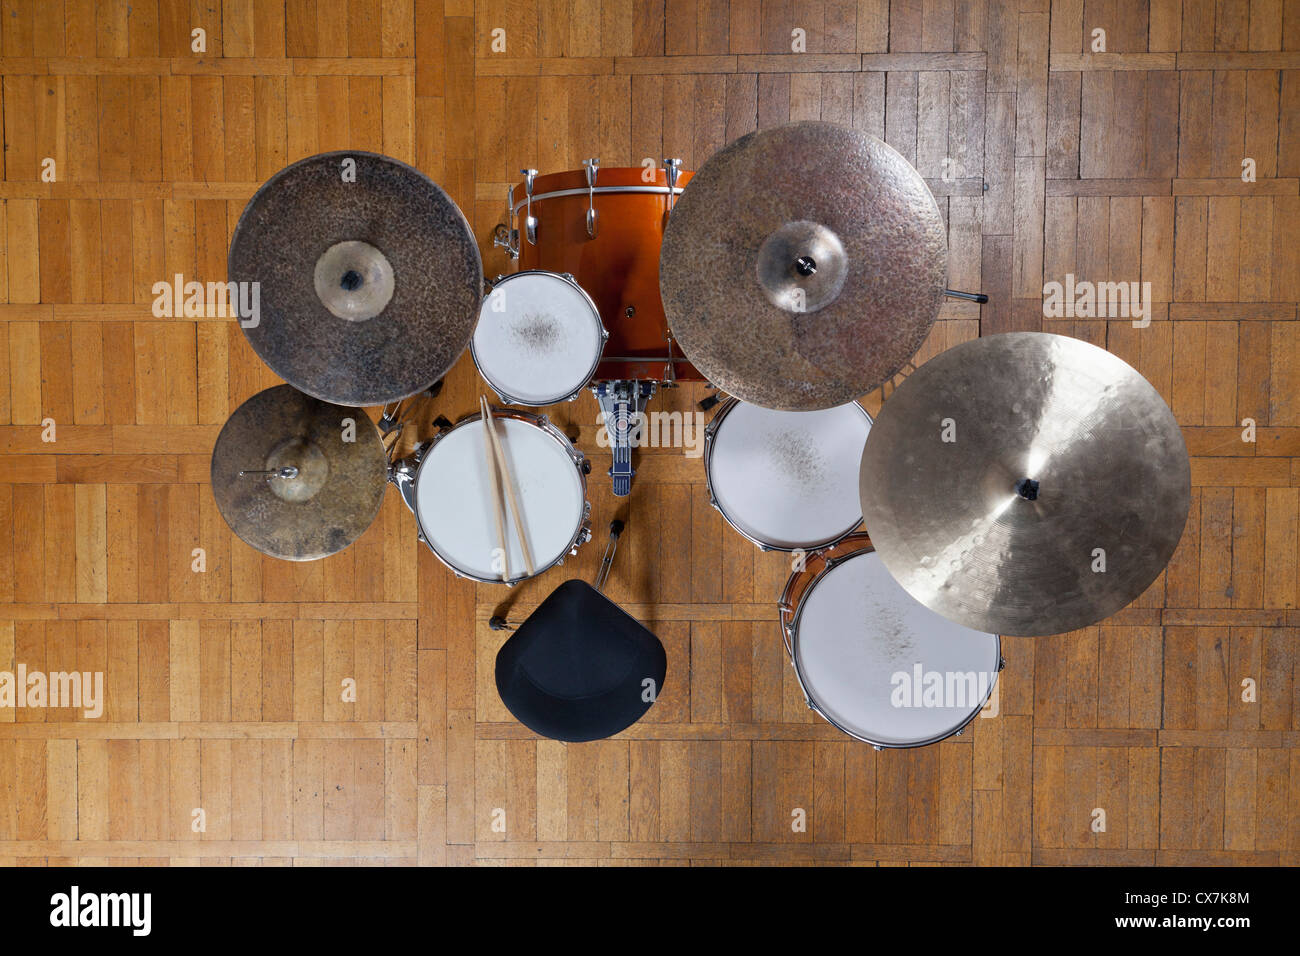 Drum kit from above Stock Photo: 50570596 - Alamy